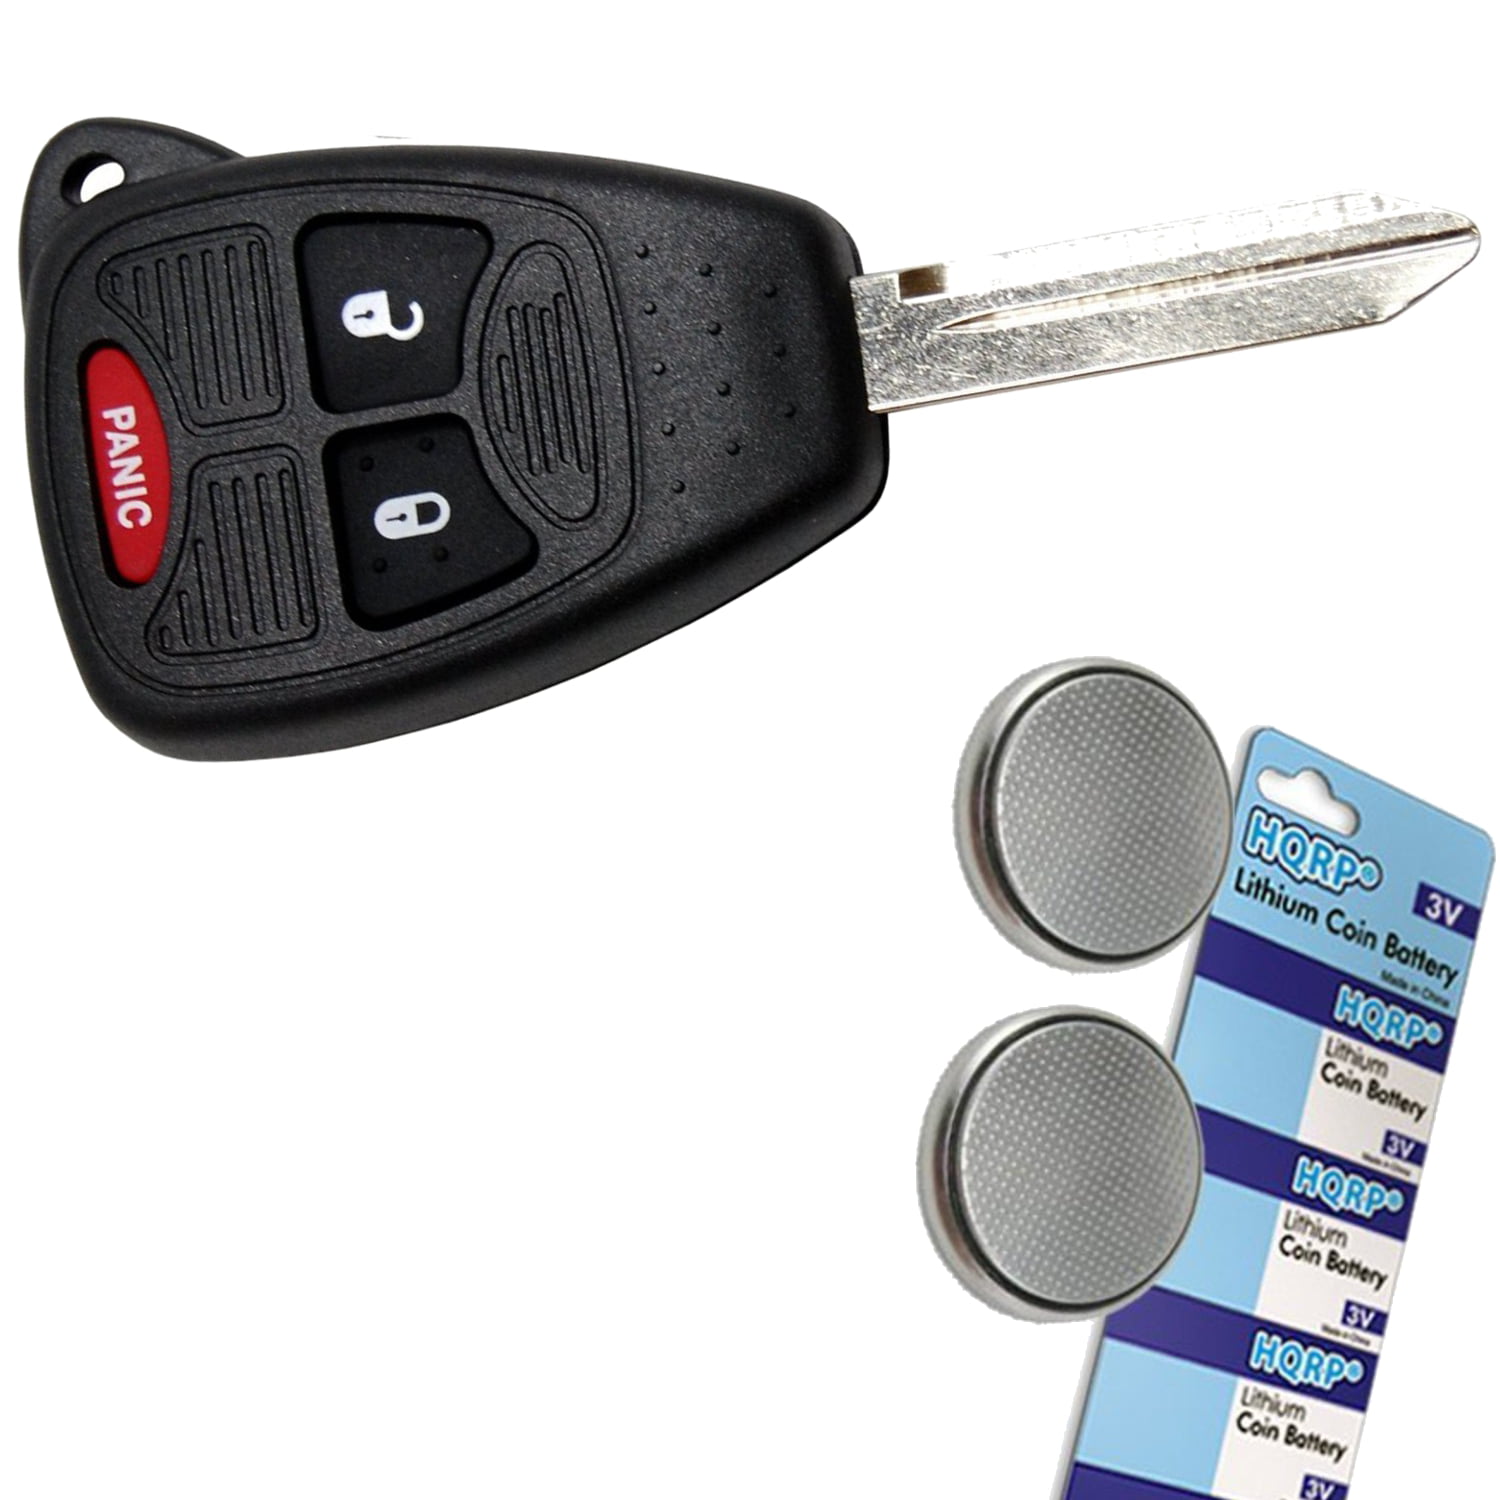 New Key Fob Remote Shell Case for a 2012 Jeep Patriot w/ 3 Buttons